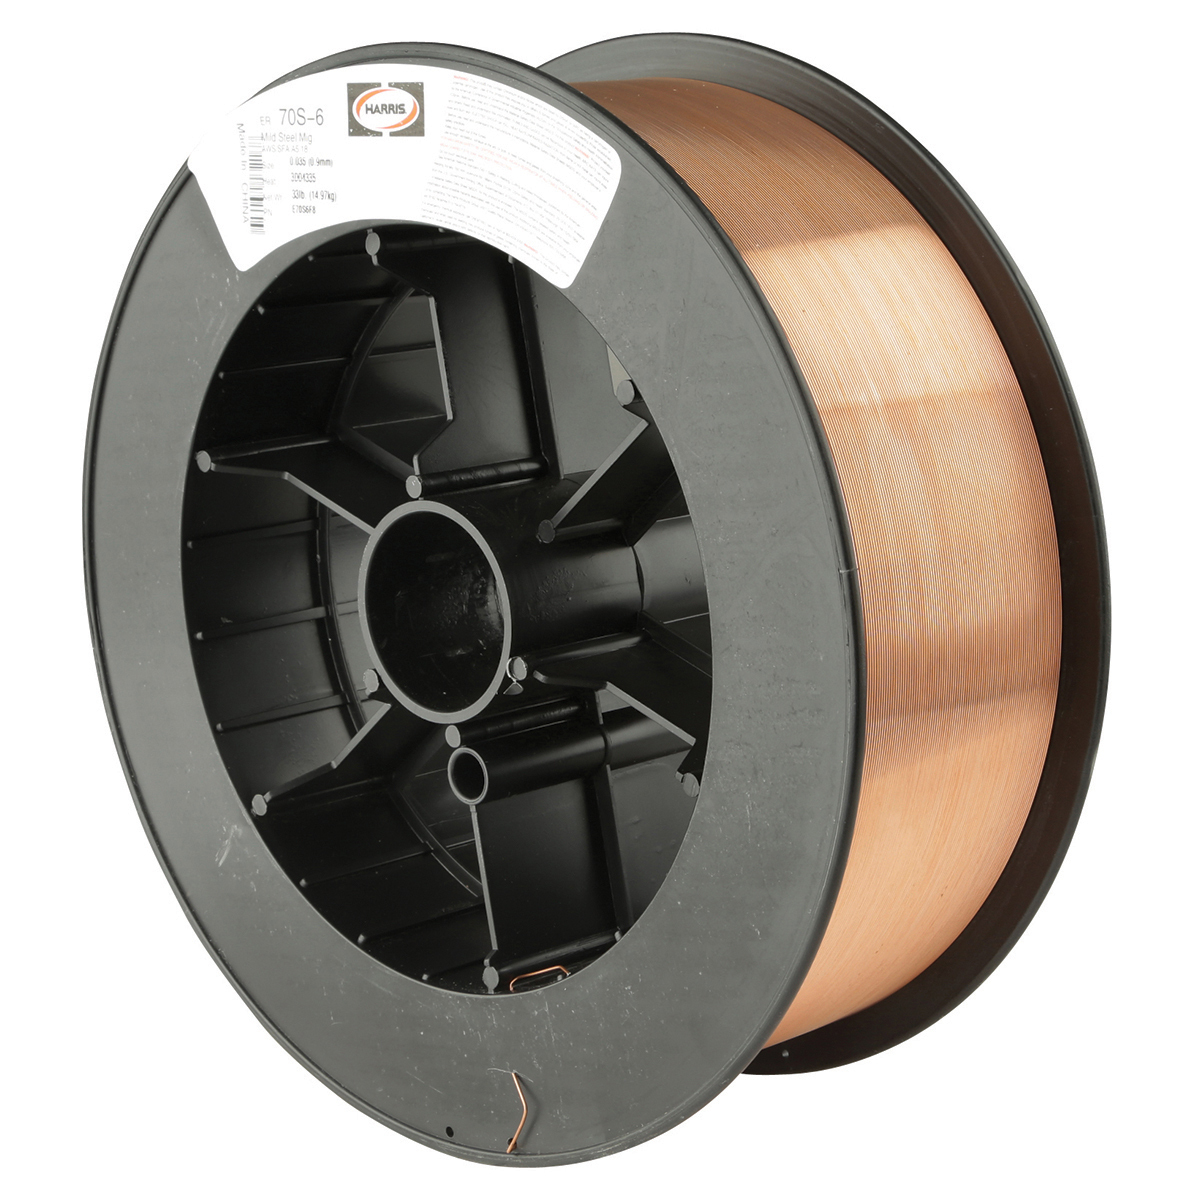 0.045 lb x 33 lb Harris Products Group Harris E70S6H8 ER70S-6 MS Spool with Welding Wire 